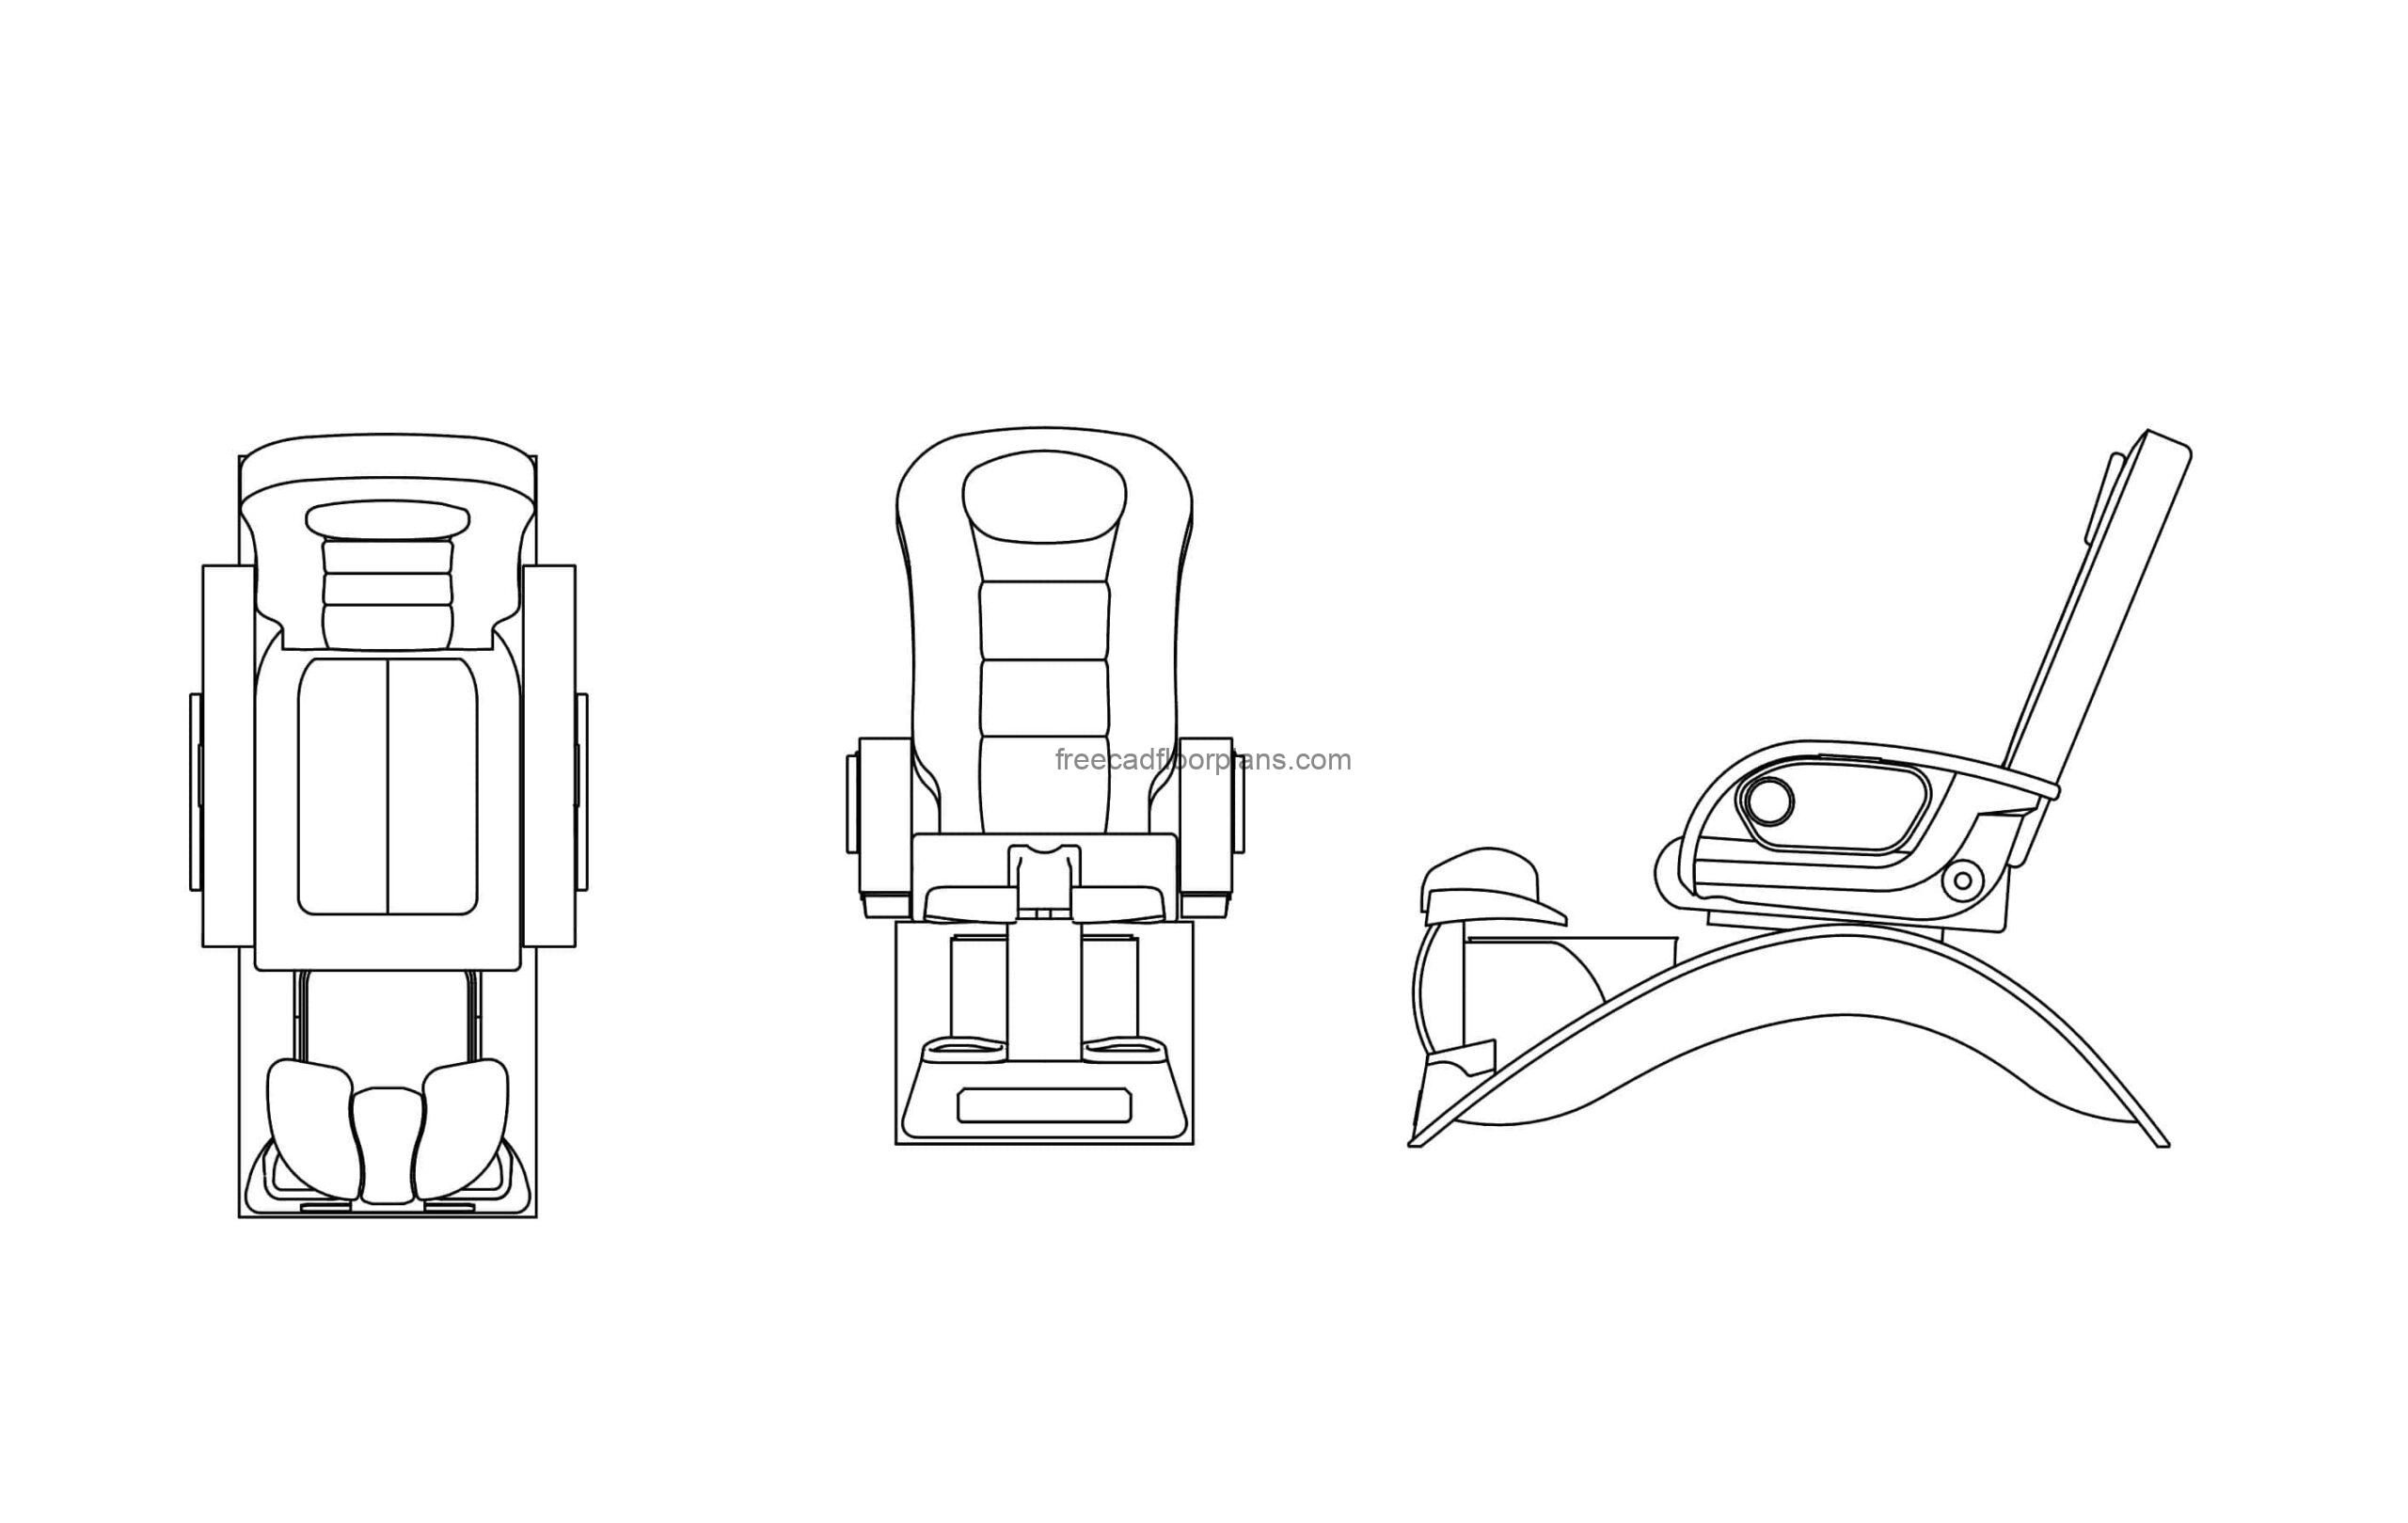 Pedicure Chair Free Cad Drawings